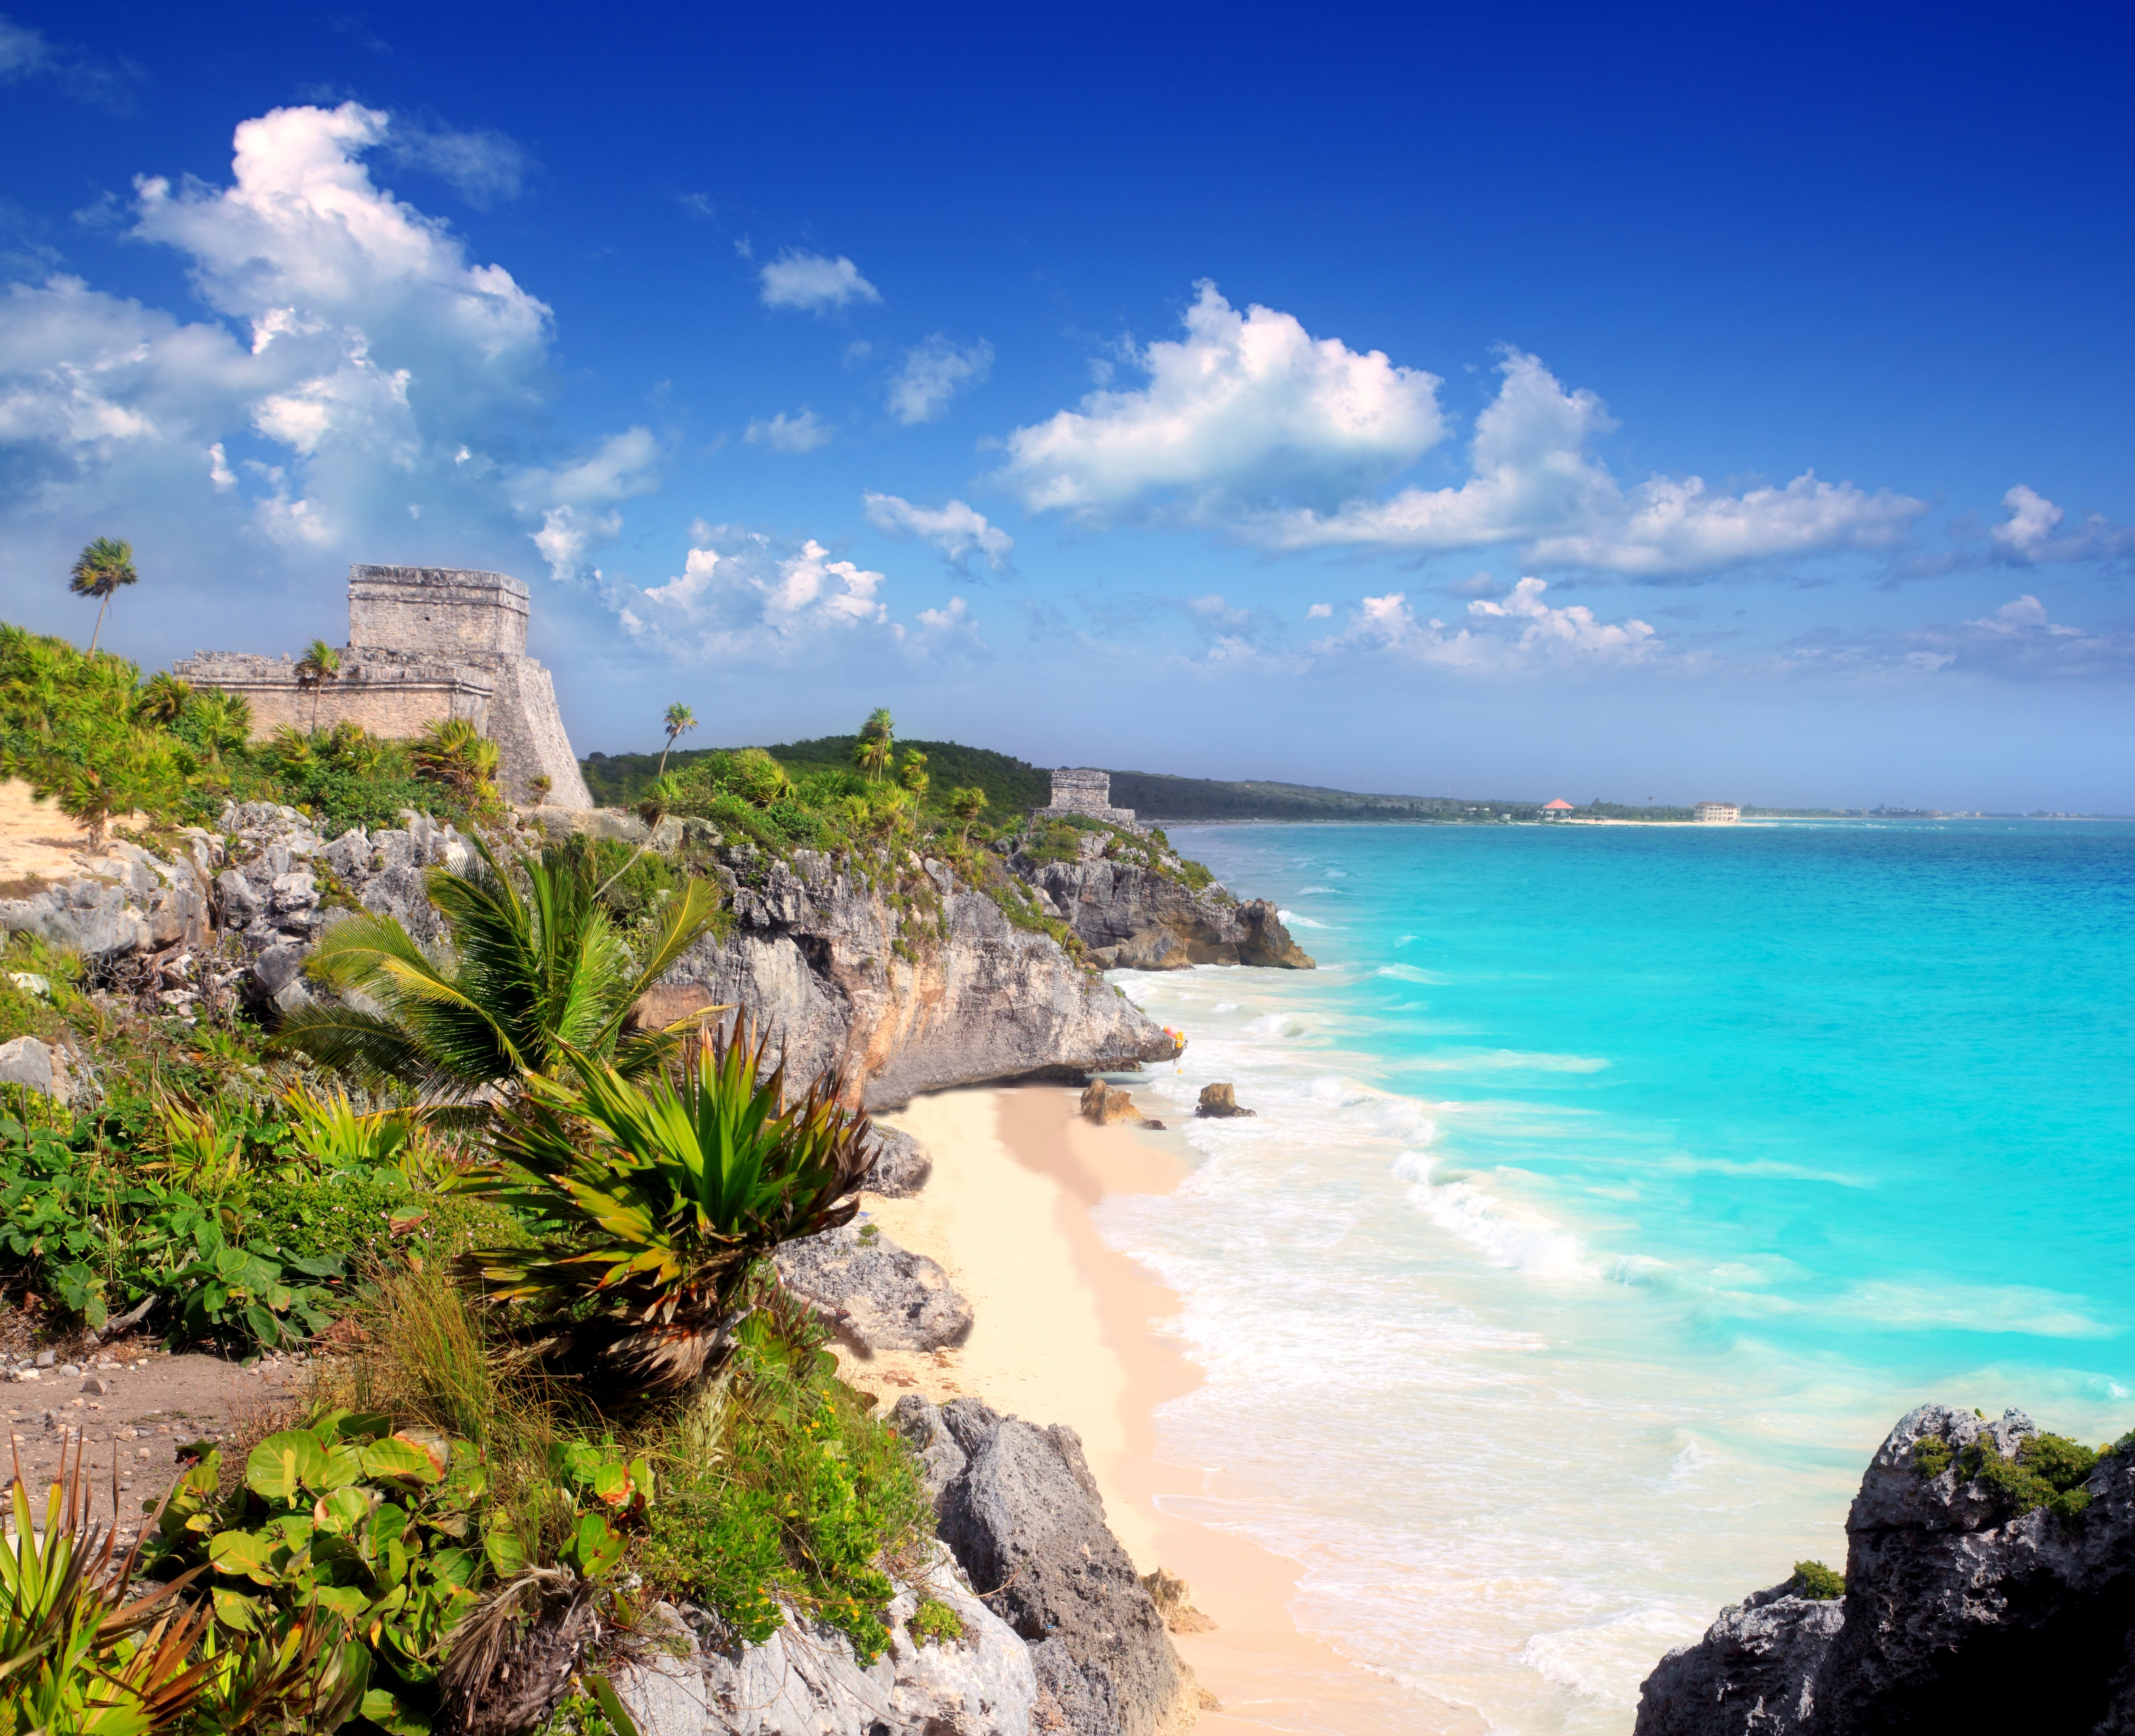 ancient Mayan ruins temple of Tulum in Caribbean turquoise sea shore